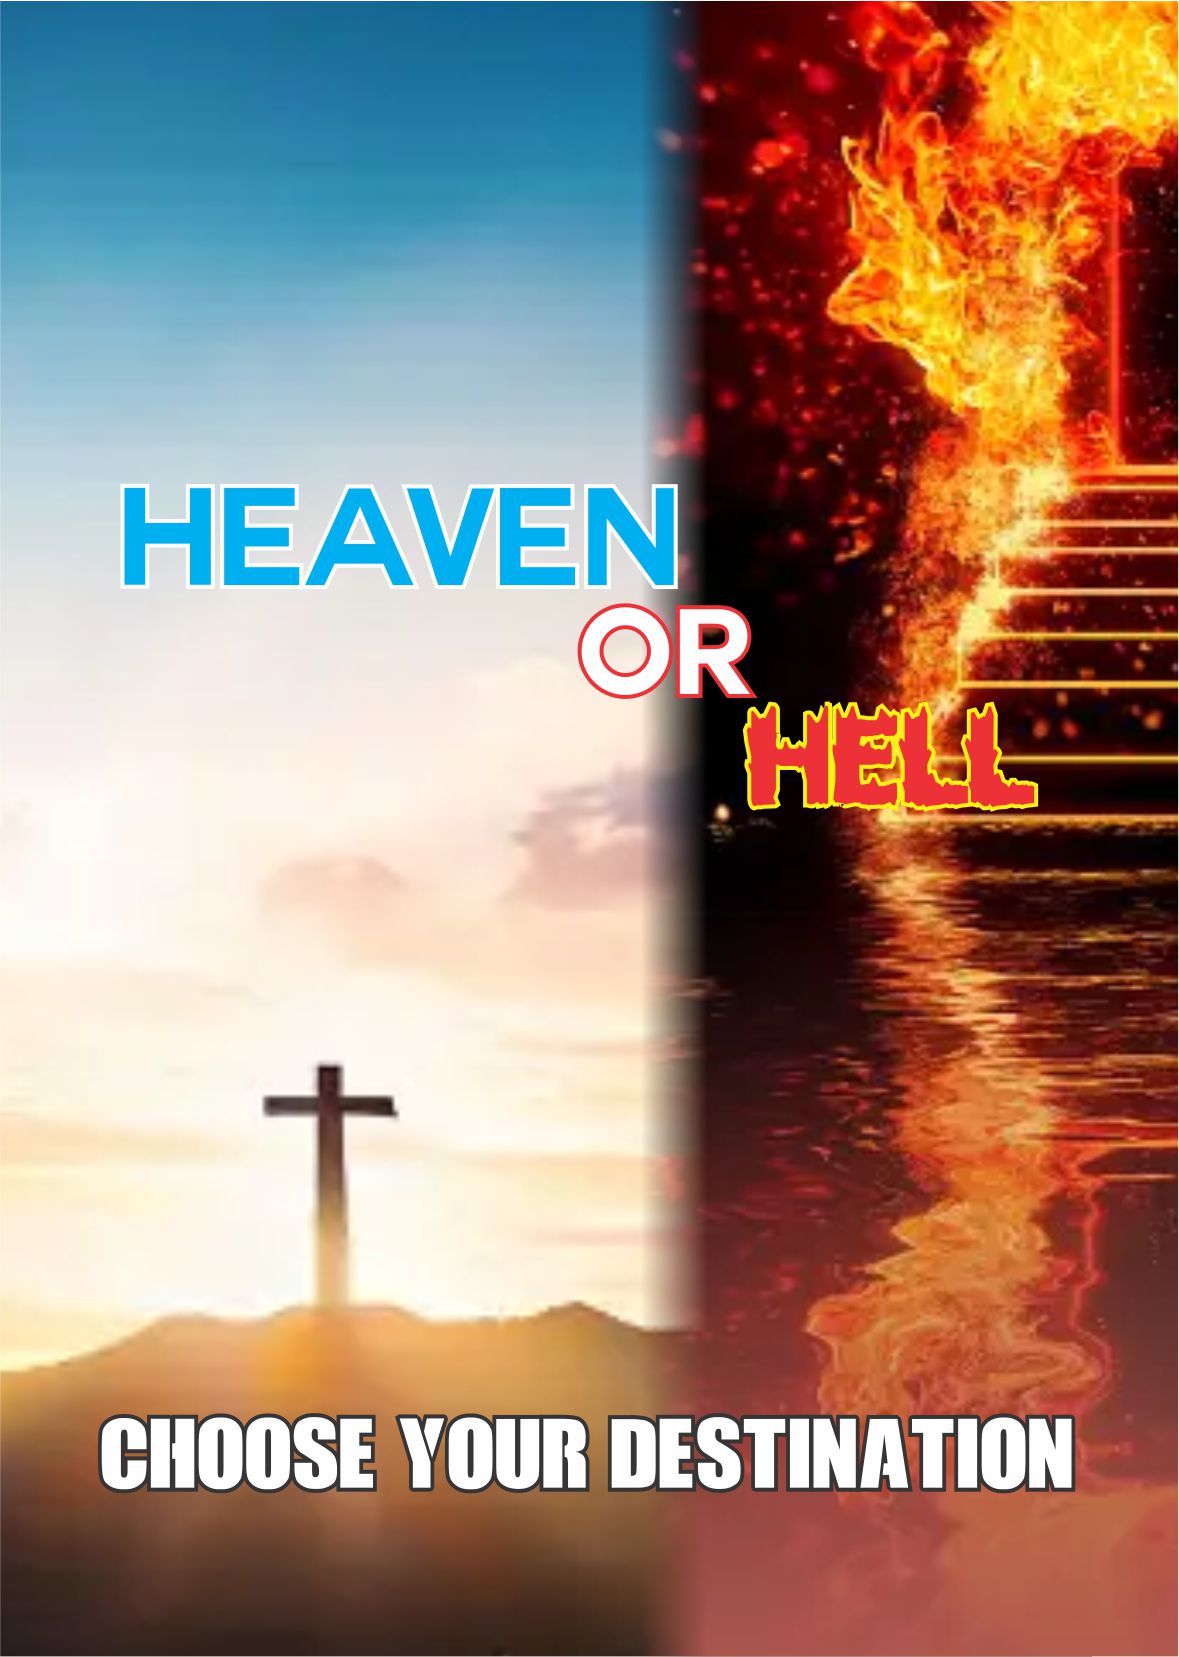 Heaven or hell: choose your destination